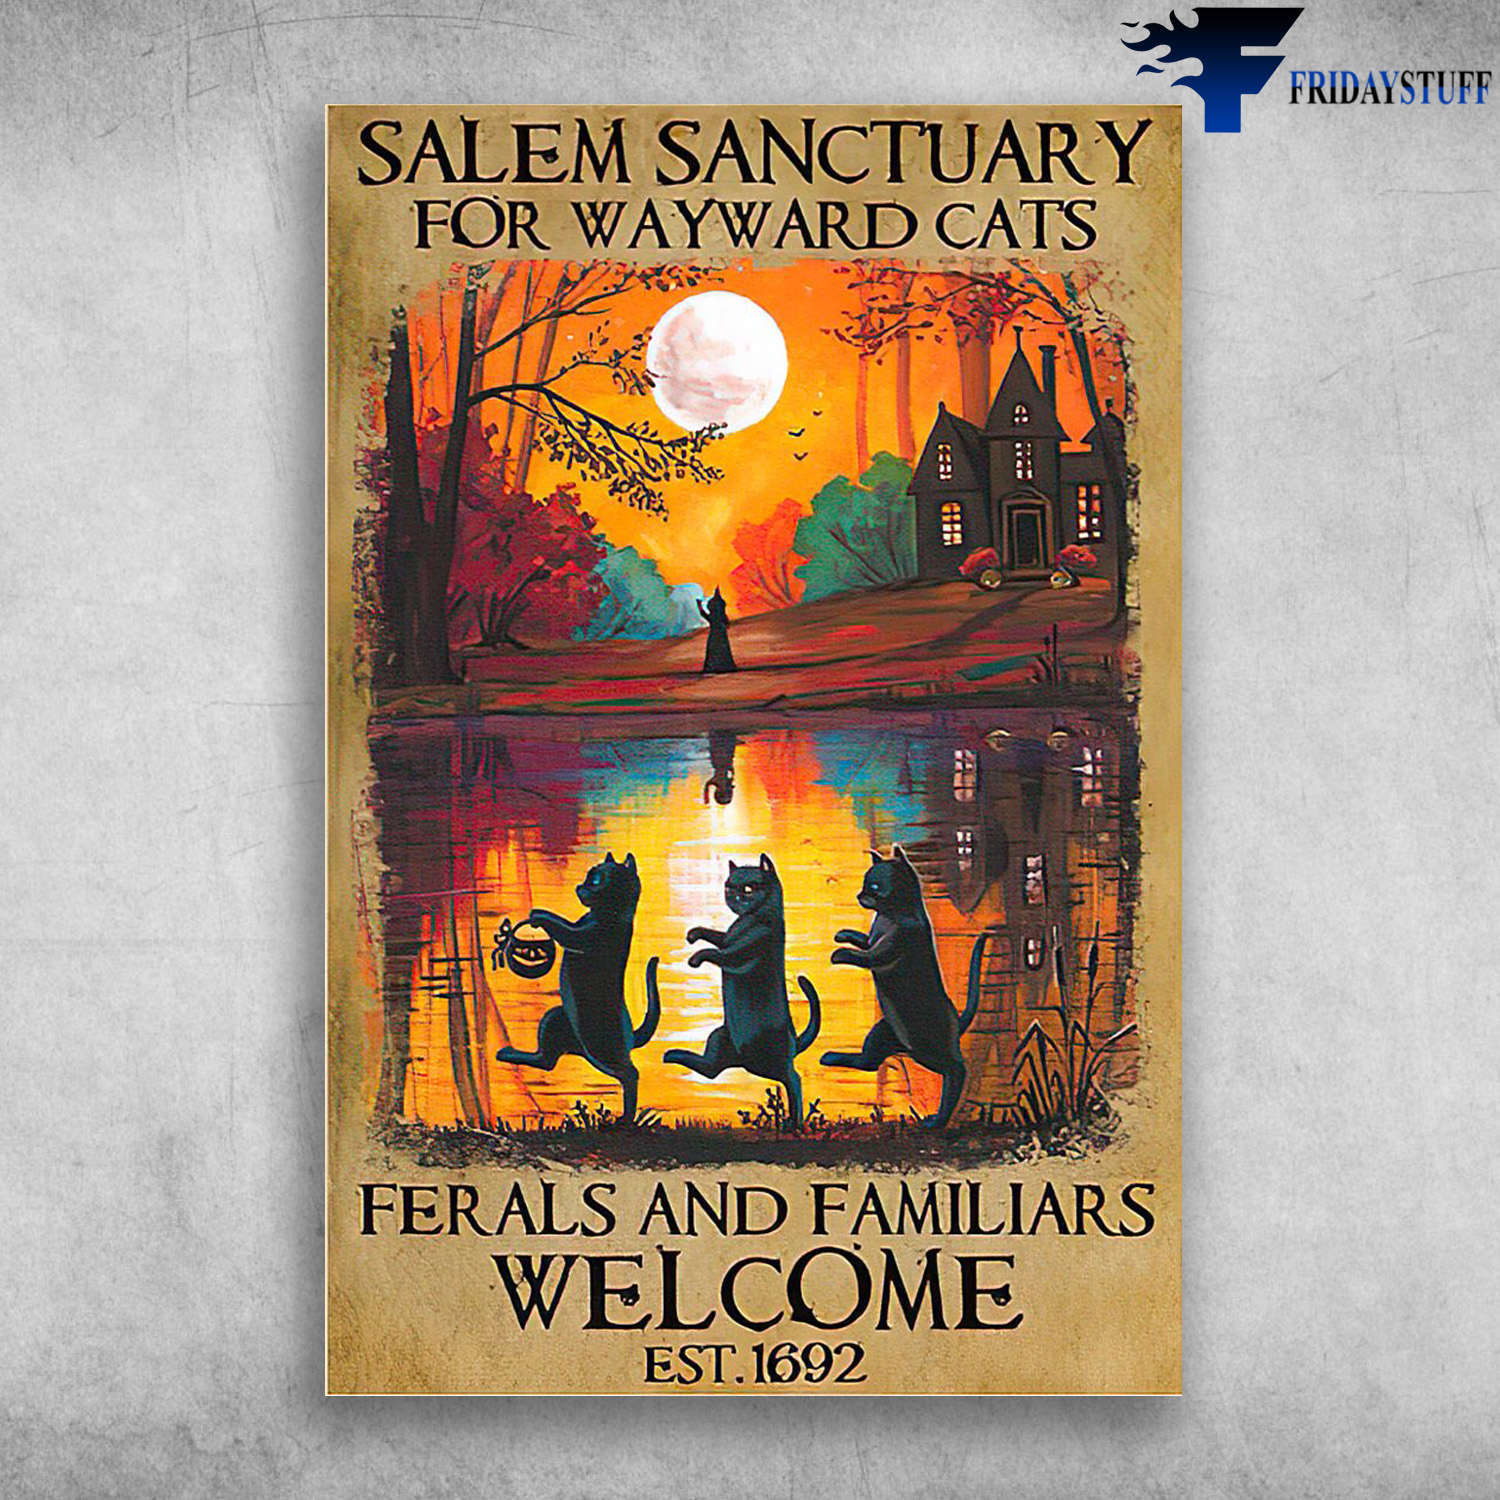 Three Cats And The Witch - Salem Sanctuary For Wayward Cats, Ferals And Familiars Wellcome, EST.1692